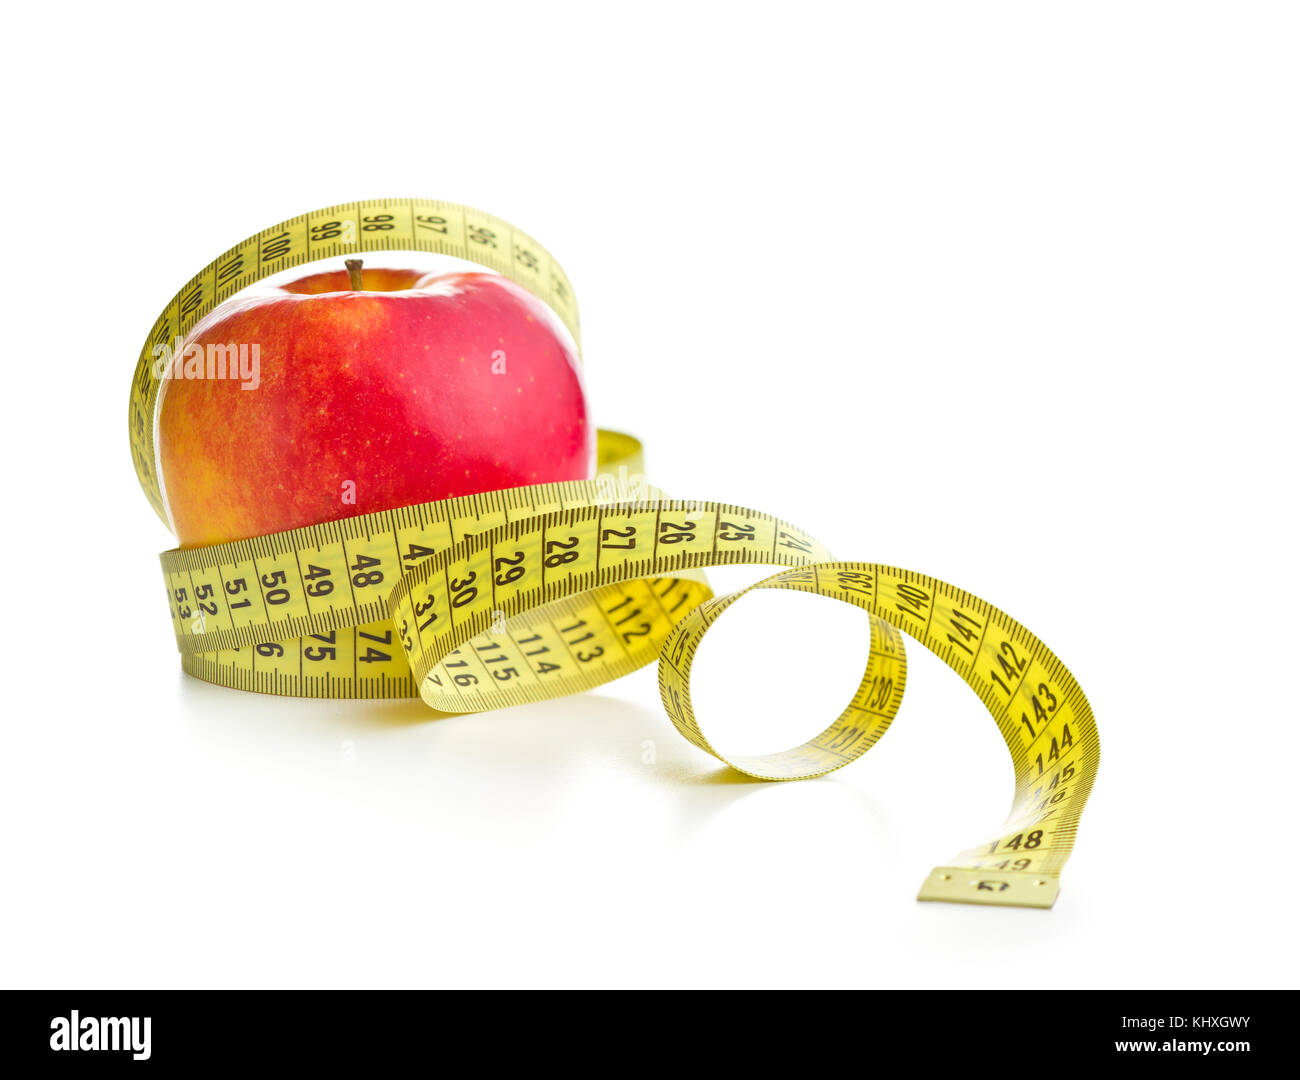 Fresh red apple and measuring tape isolated on white background. Diet concept. Stock Photo